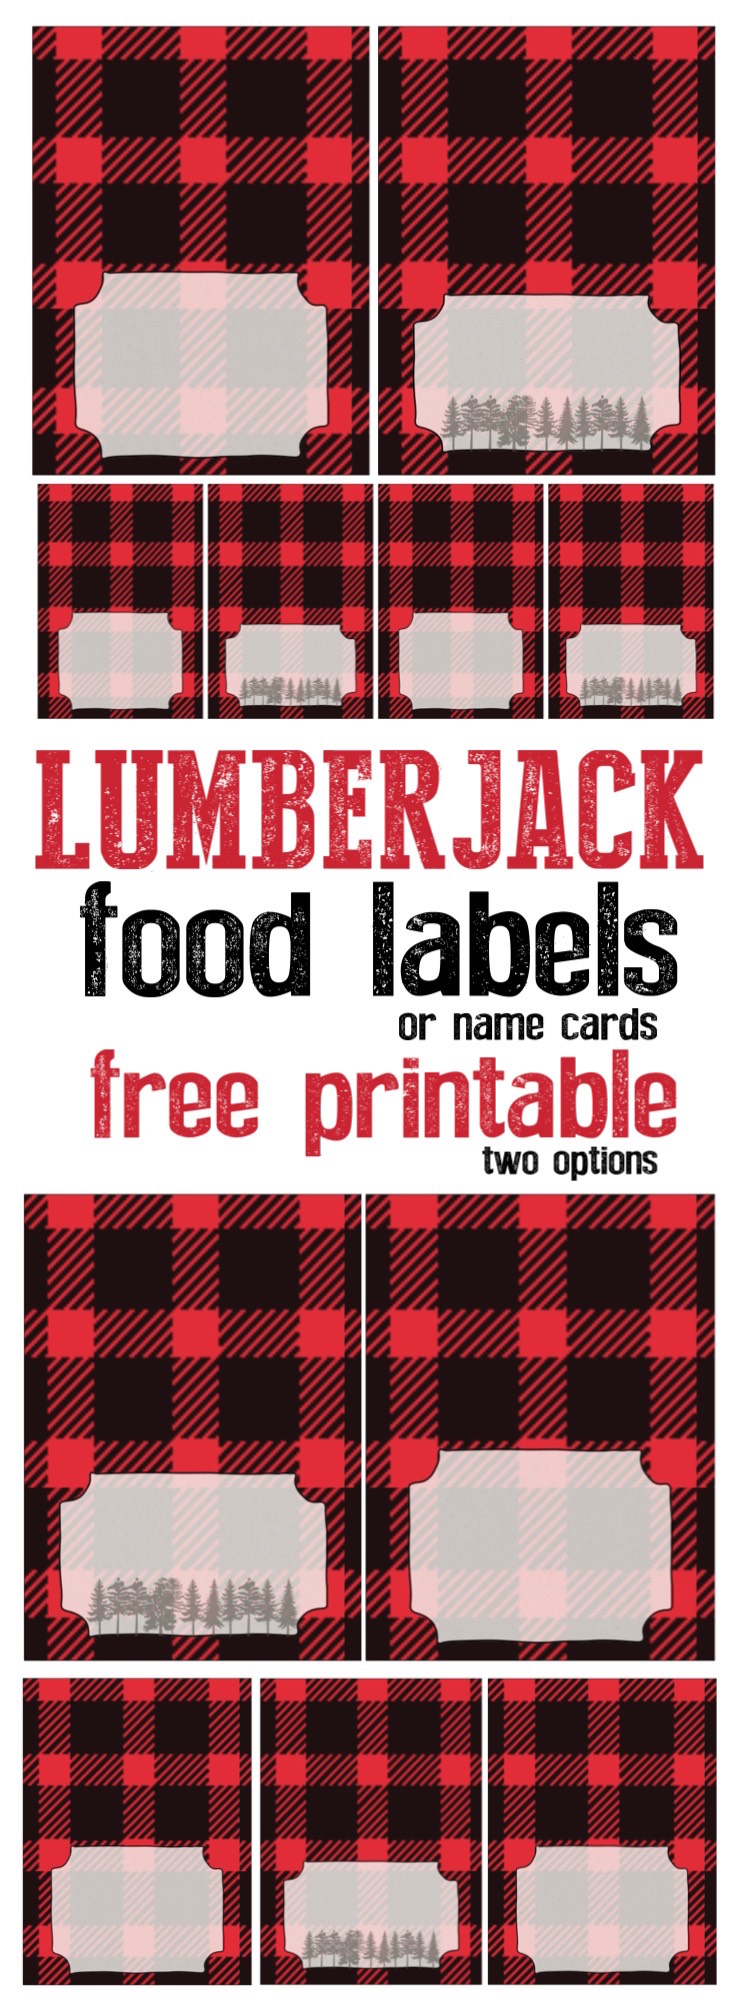 Lumberjack food labels or name cards free printable. Adorable lumberjack decor for your birthday party, baby shower, or woodsy wedding.